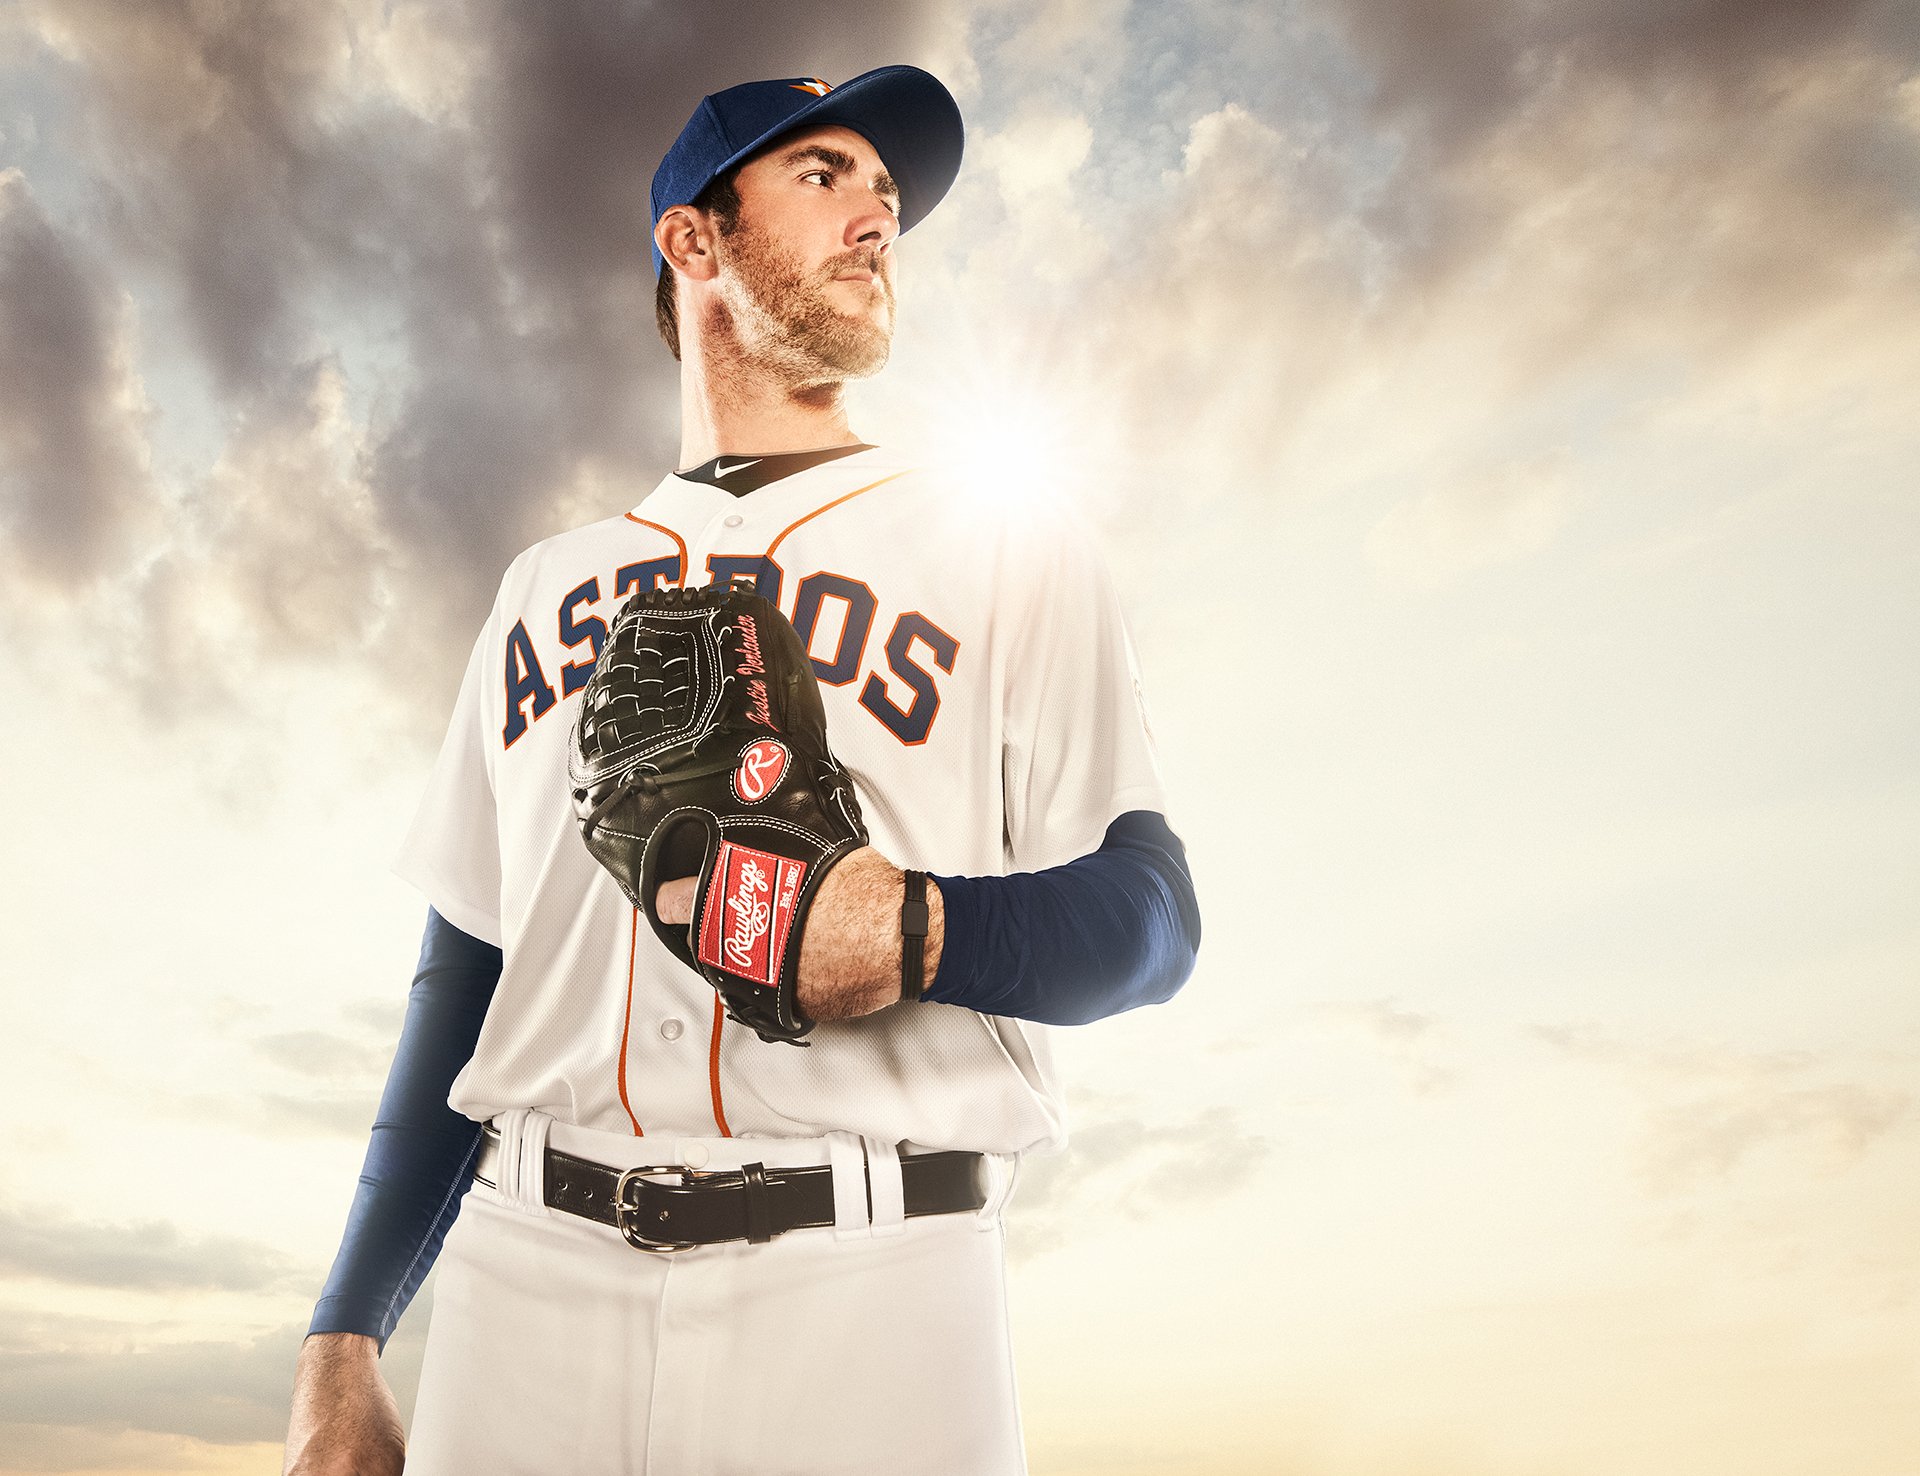 Spring Traing photographed by sports photographer Blair Bunting in Phoenix, AZ. Photographing ad campaigns in Arizona and Florida of athletes is the best part of commercial photography.